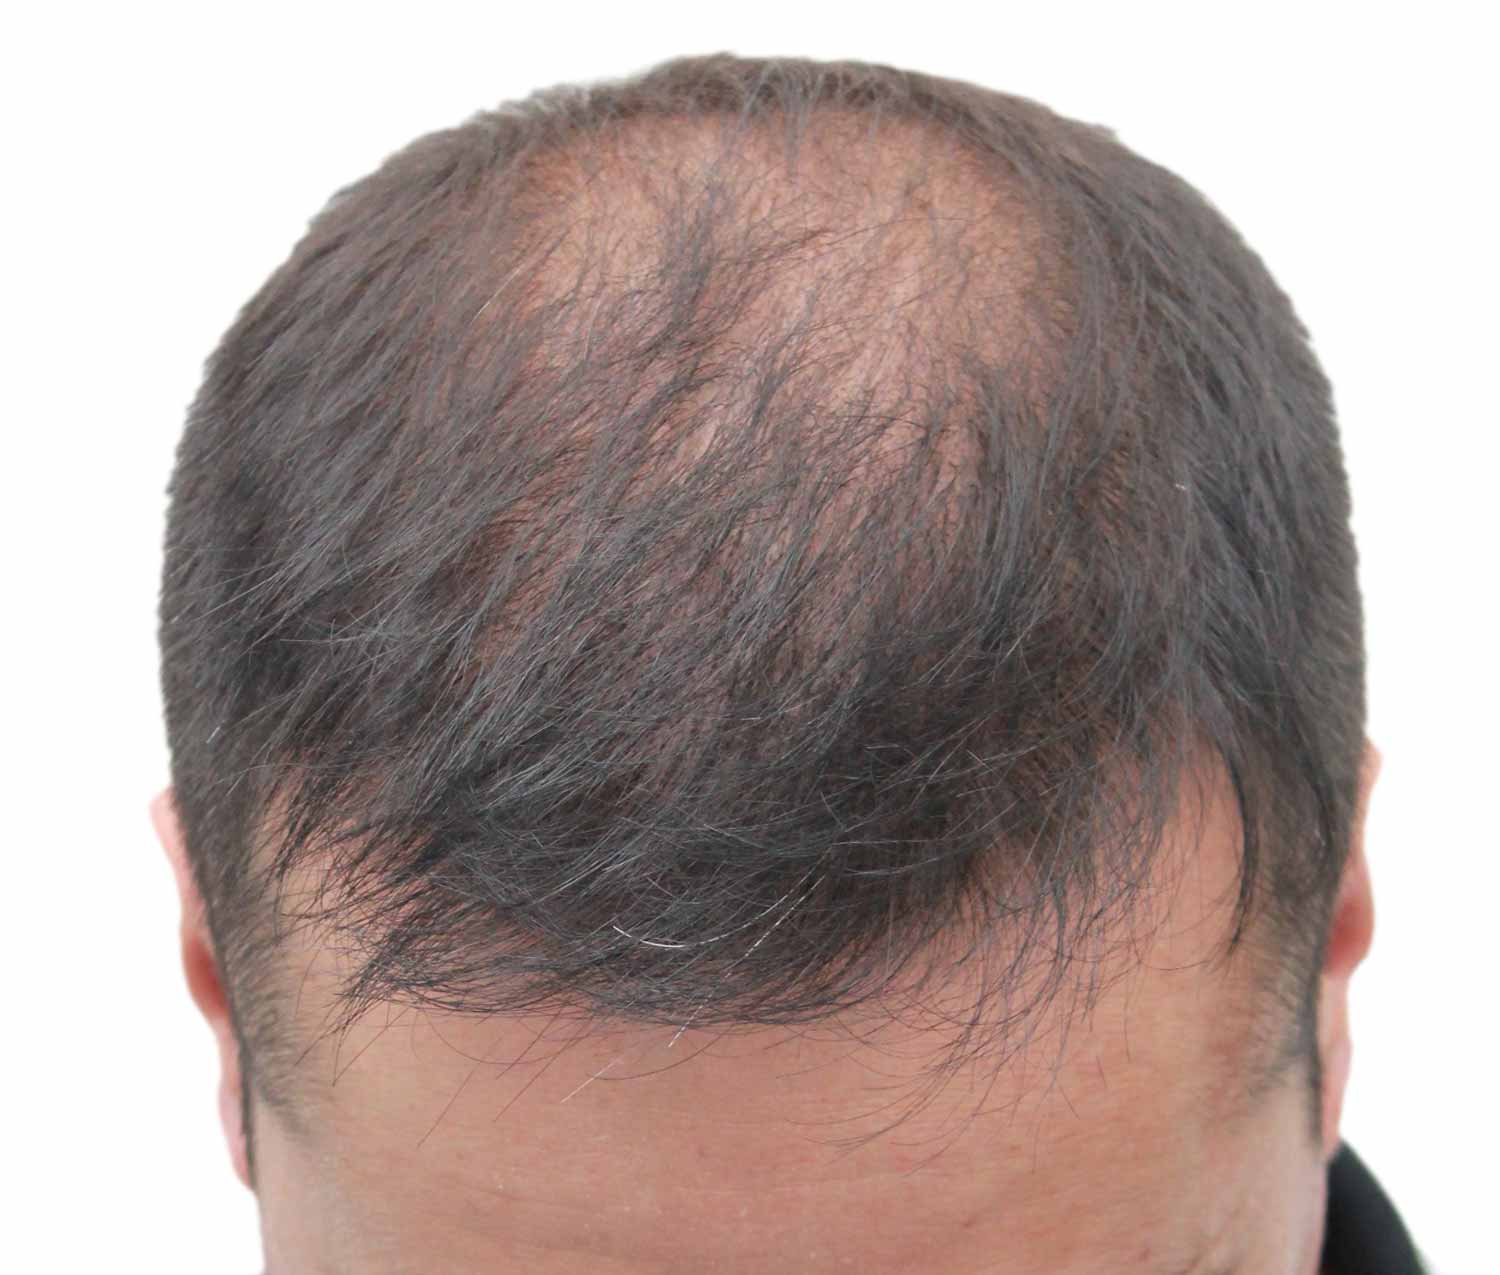 a close up of a man 's head after hair transplant